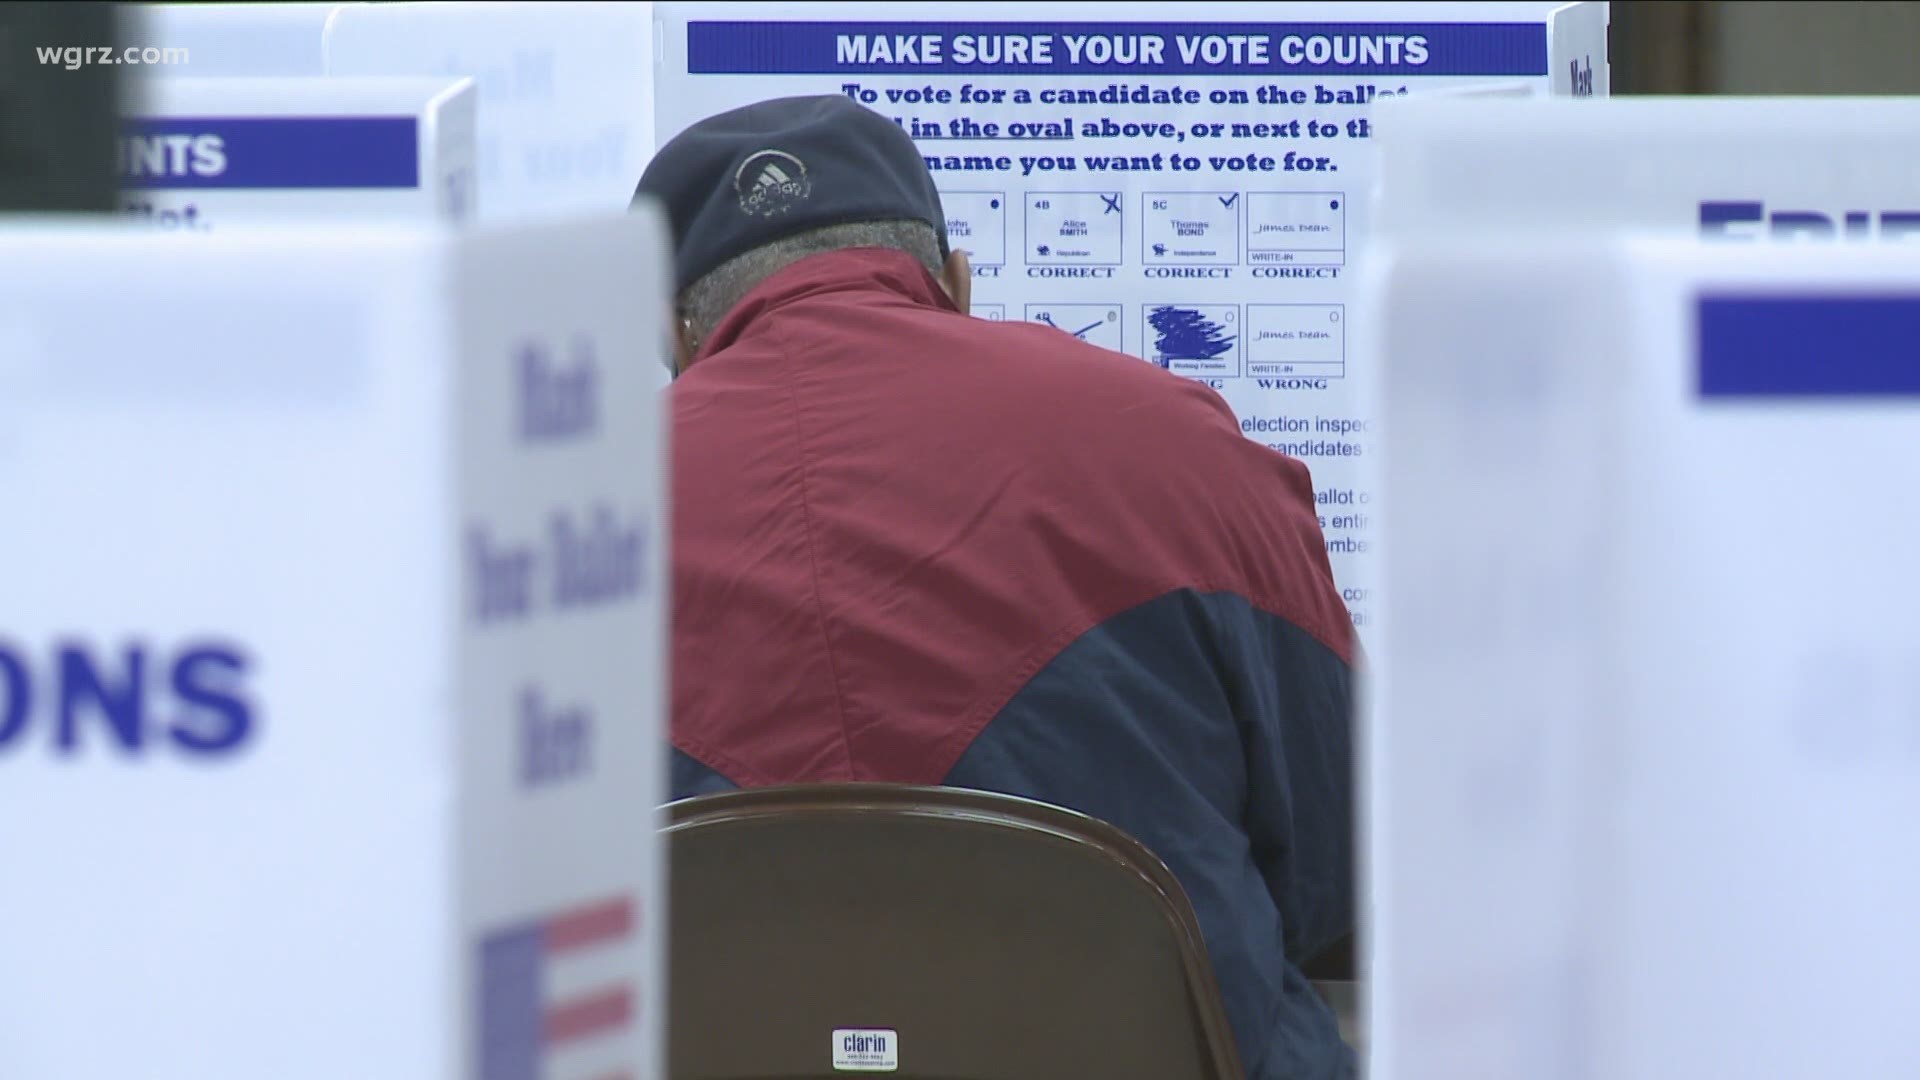 With a recent uptick in cases, some may wonder if that could effect your ability to vote in person.